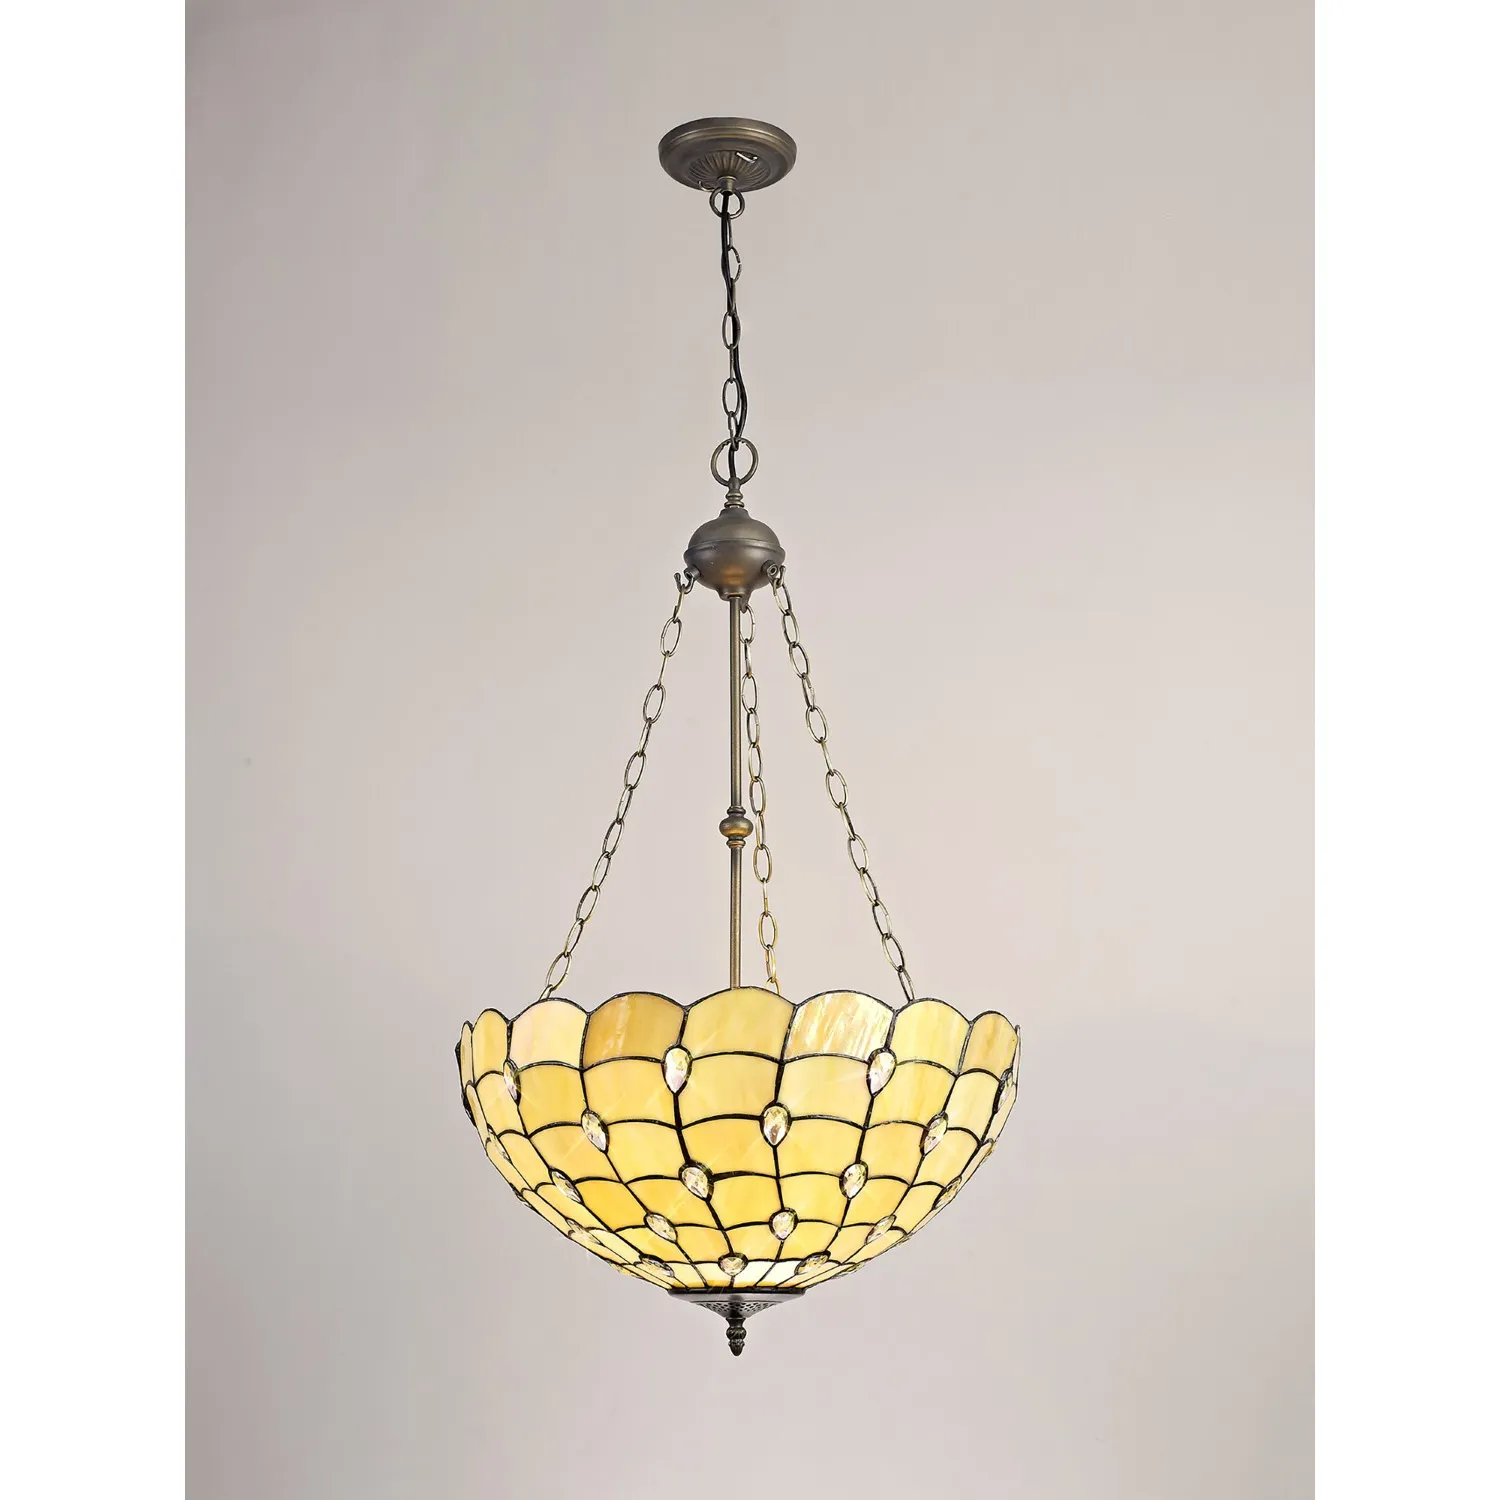 Stratford 3 Light Uplighter Pendant E27 With 50cm Tiffany Shade, Beige Clear Crystal Aged Antique Brass